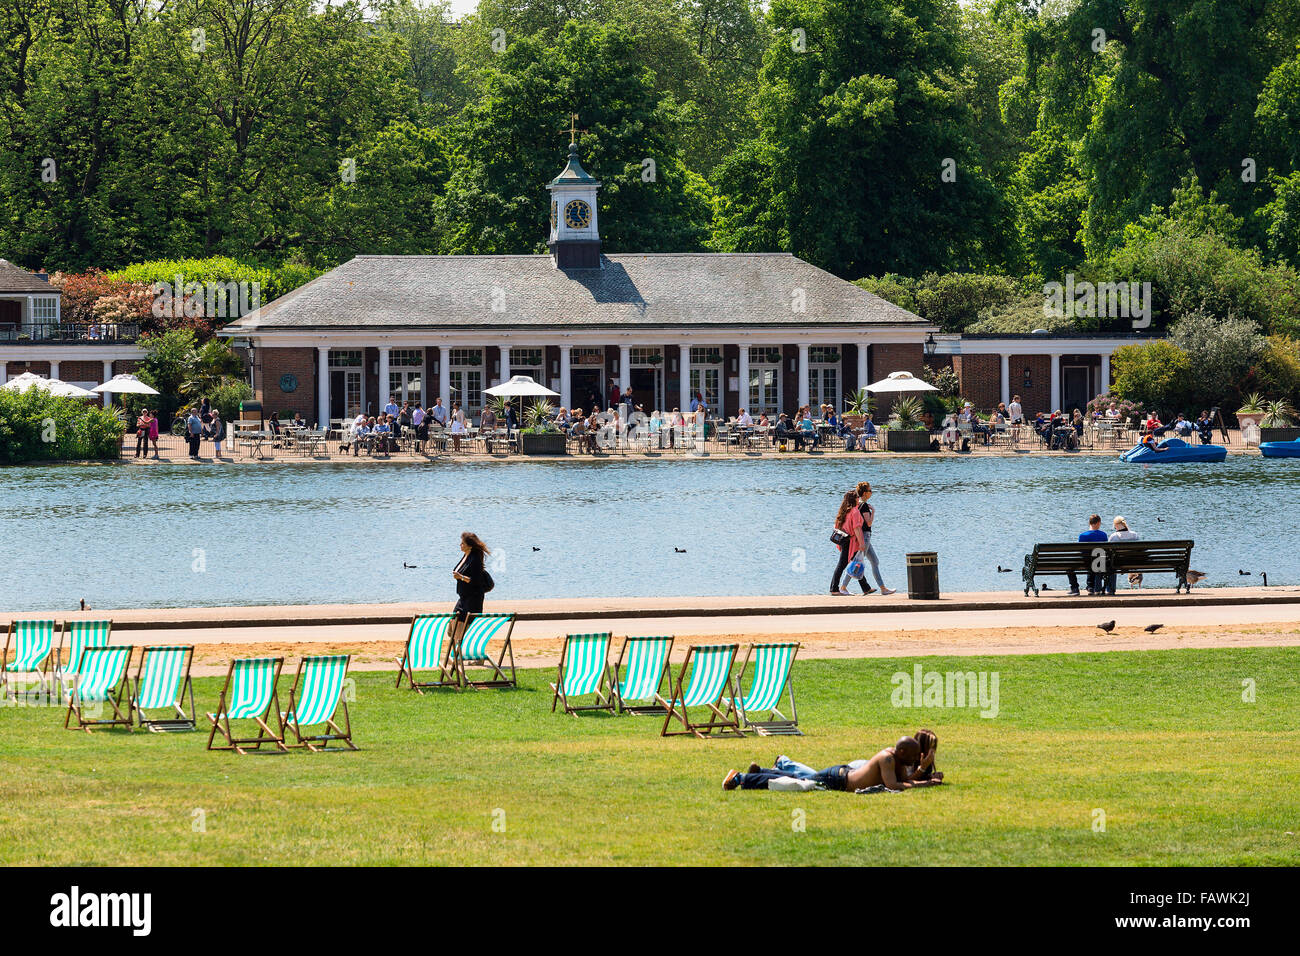 People in relaxing on lawns in deckchairs in Hyde Park in summer. Stock Photo